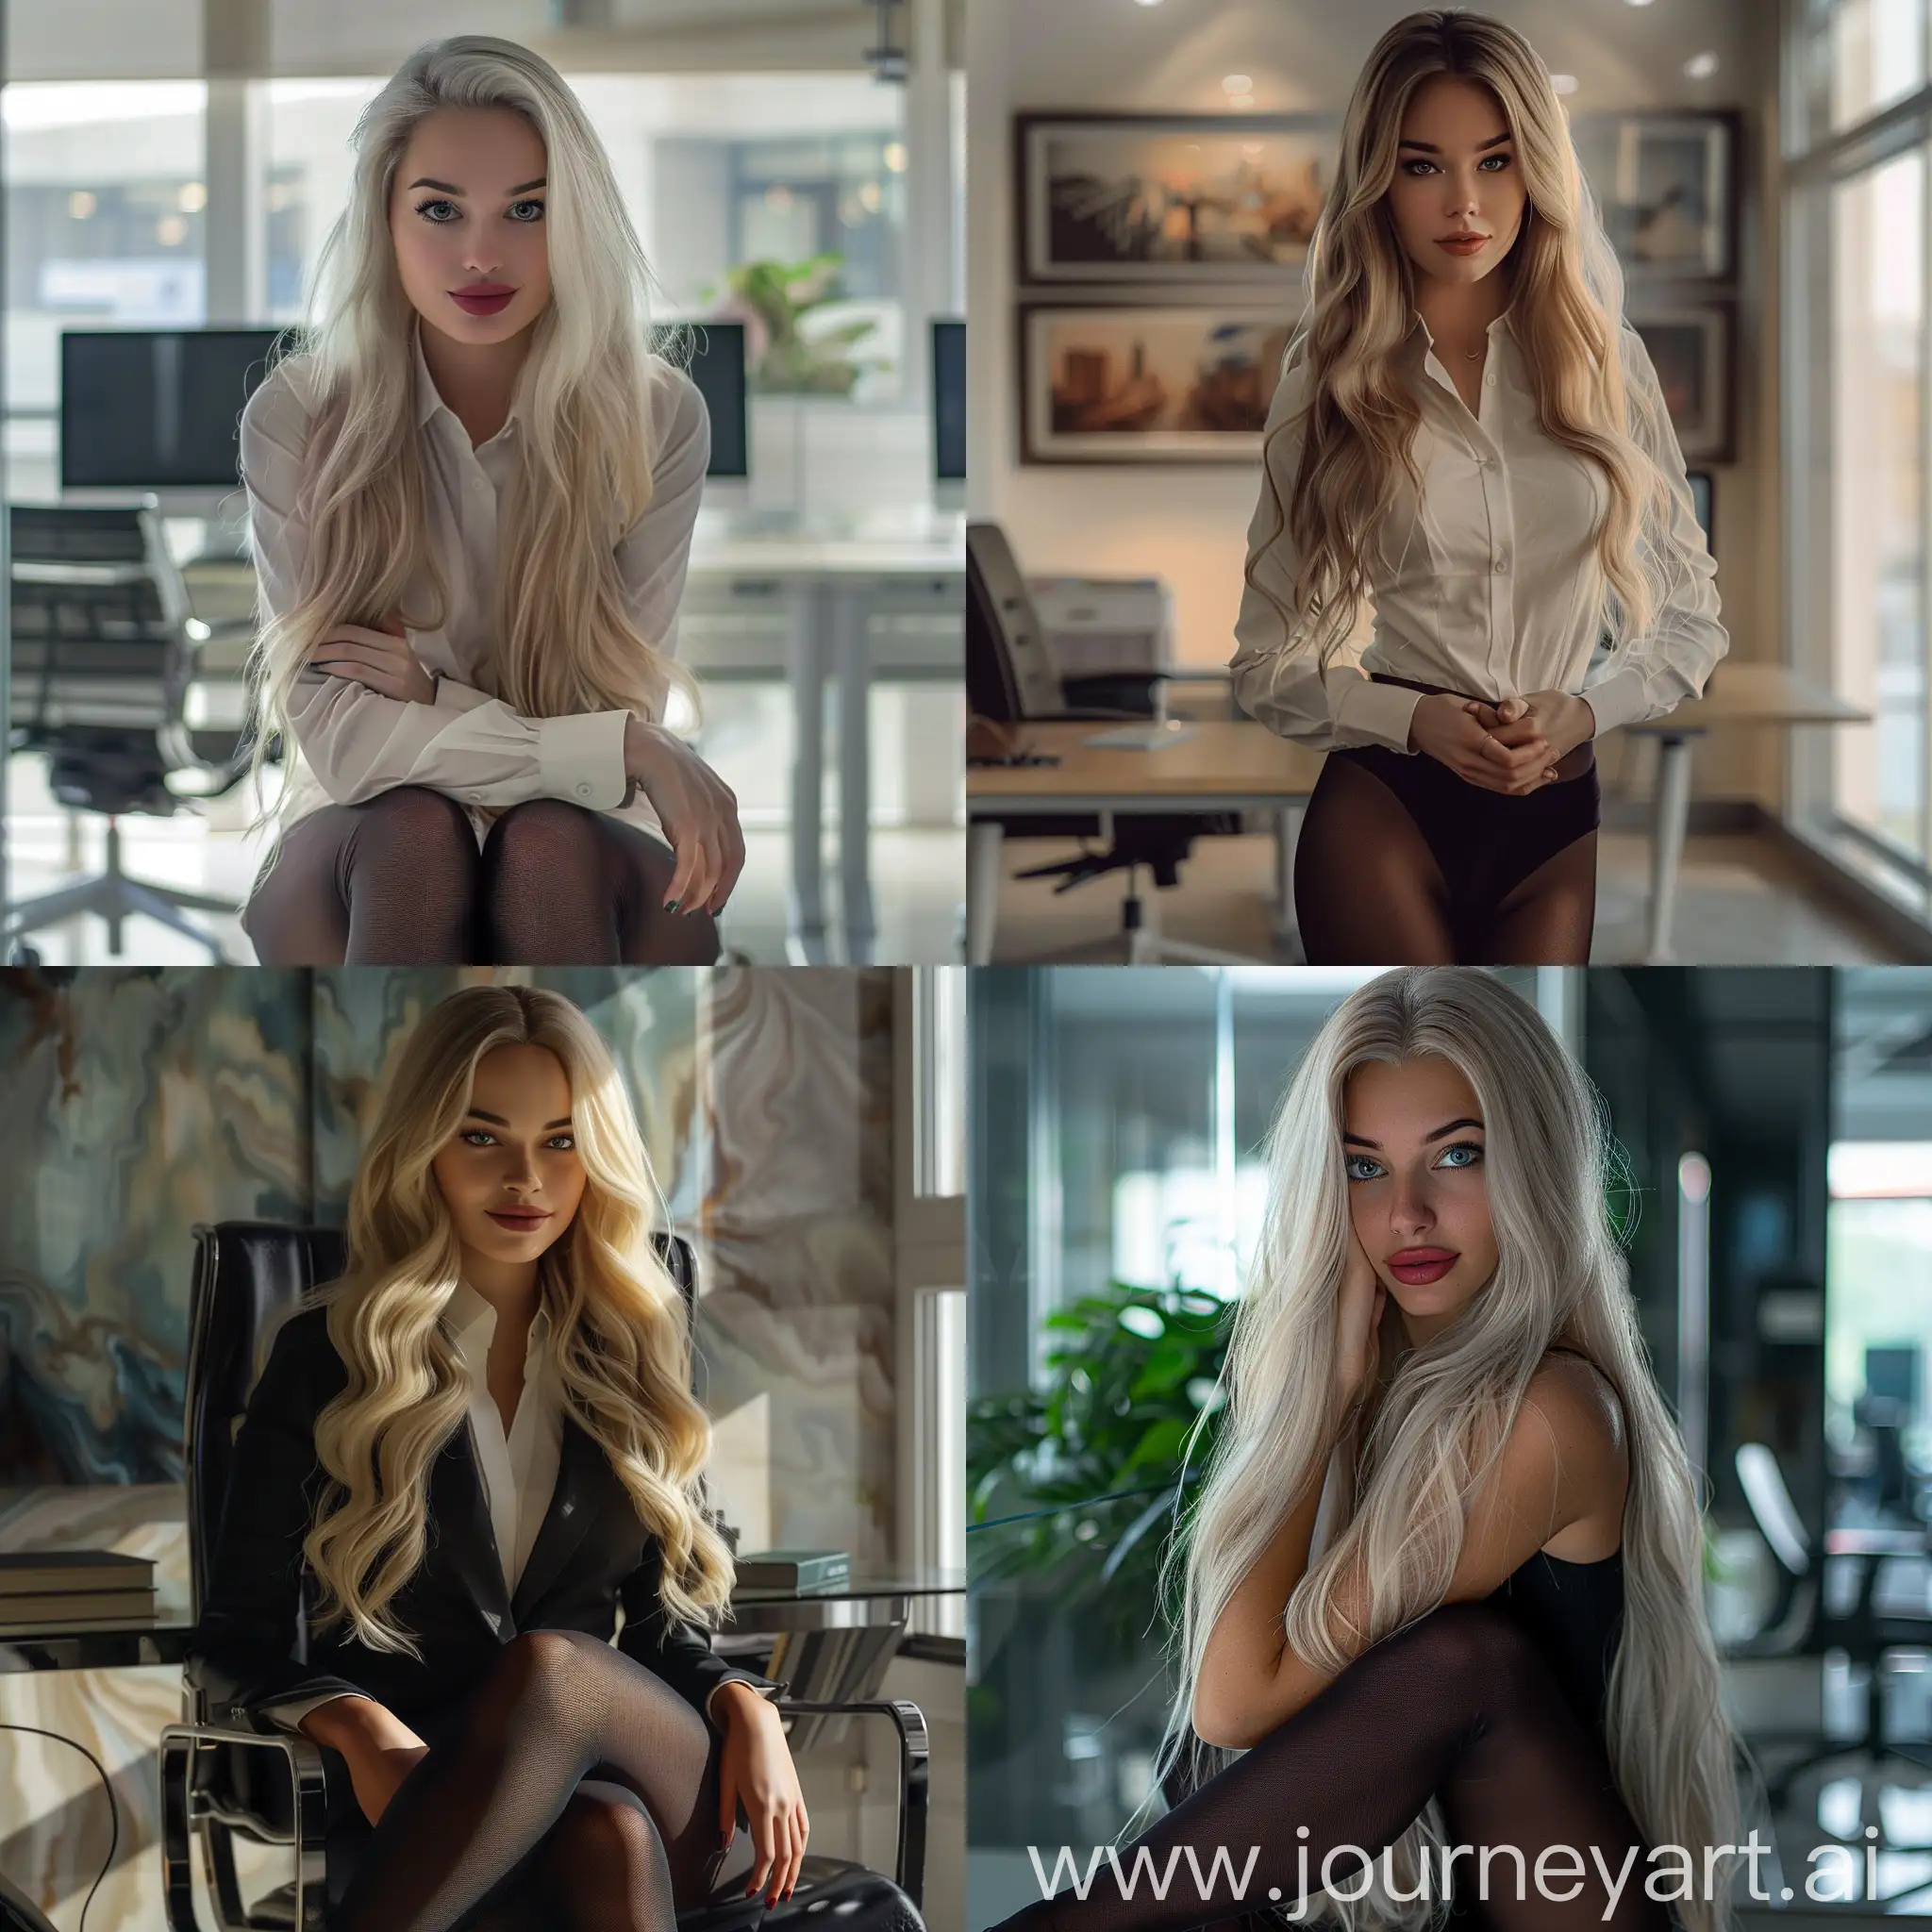 Hyperrealistic-Portrait-of-a-Smiling-Young-Woman-in-a-Beautiful-Office-Setting